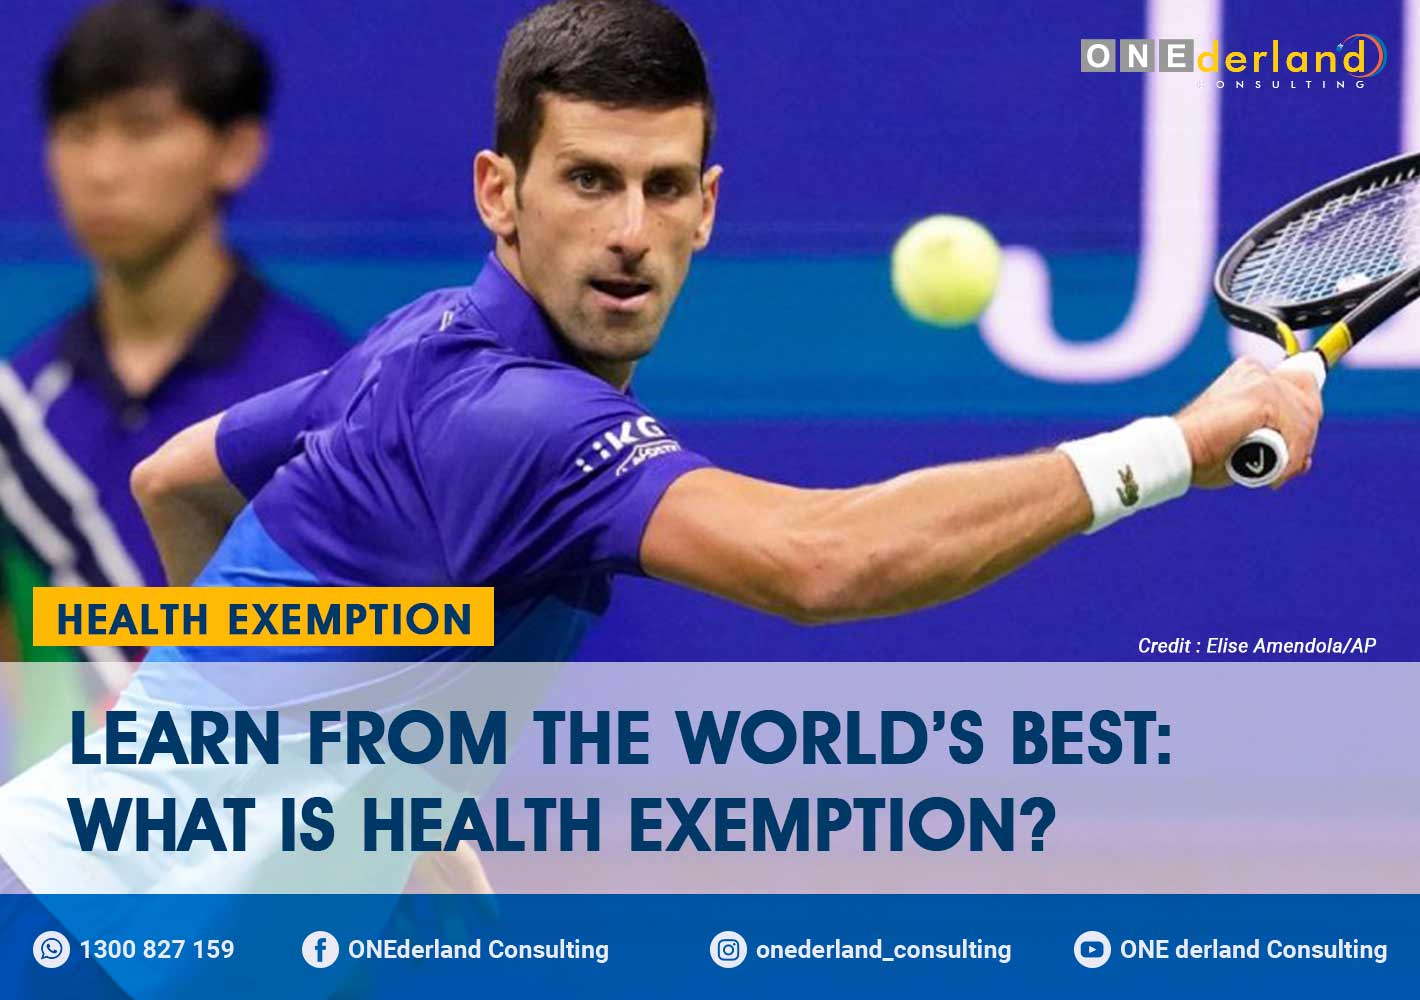 Learn from Novak Djokovic’s Case: What is Health Exemption and How Do We Get It?